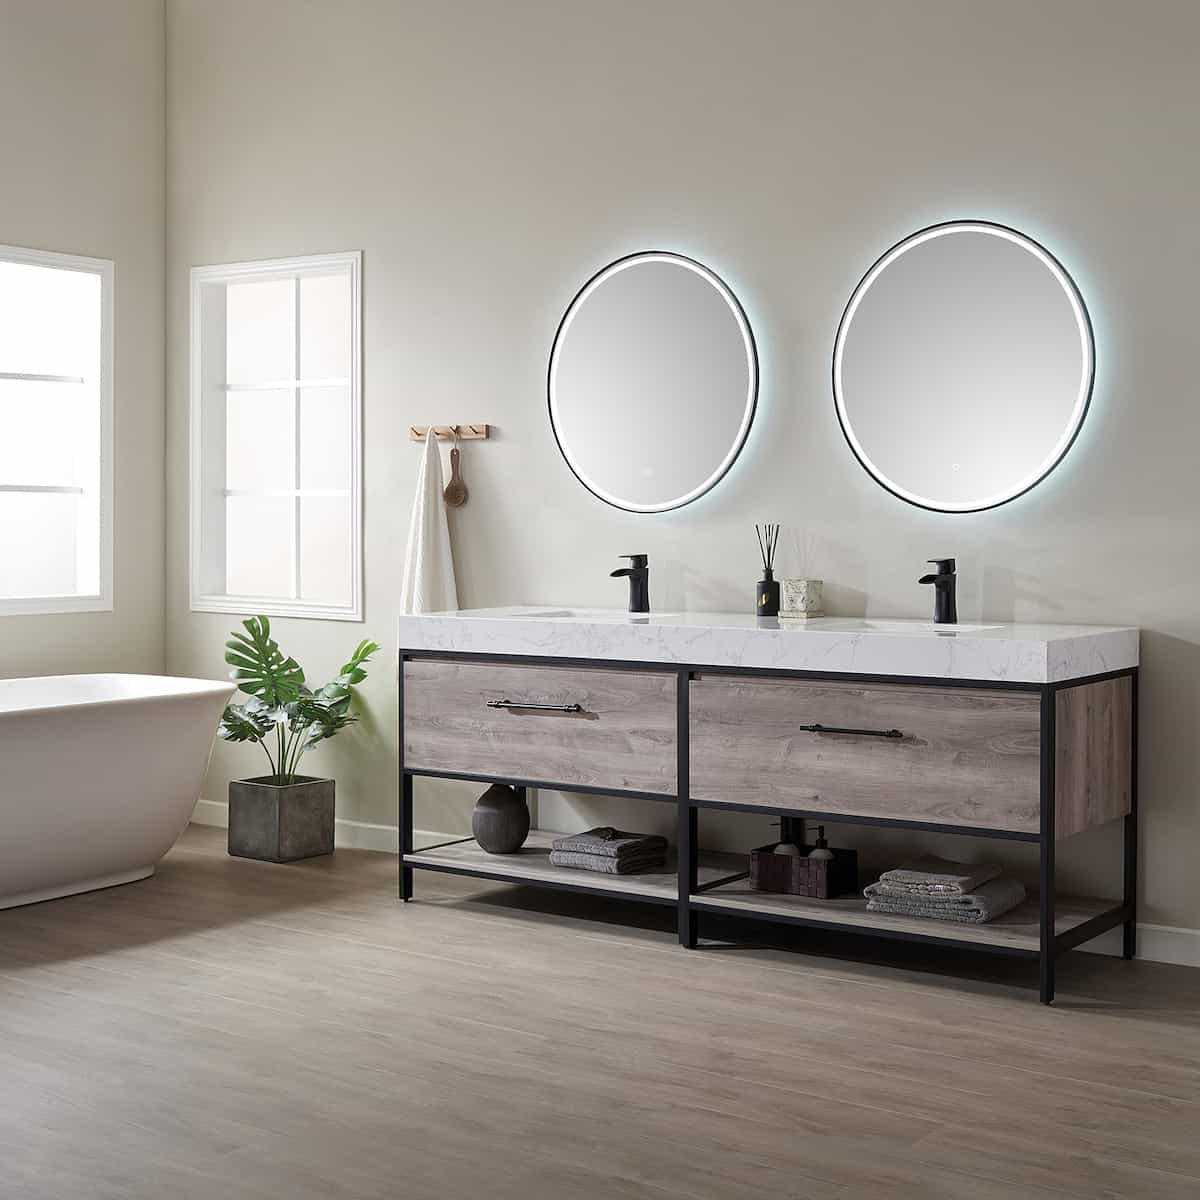 Vinnova Palma 84 Inch Freestanding Double Vanity in Mexican Oak with White Composite Grain Stone Countertop With Mirrors Side 701284-MXO-GW